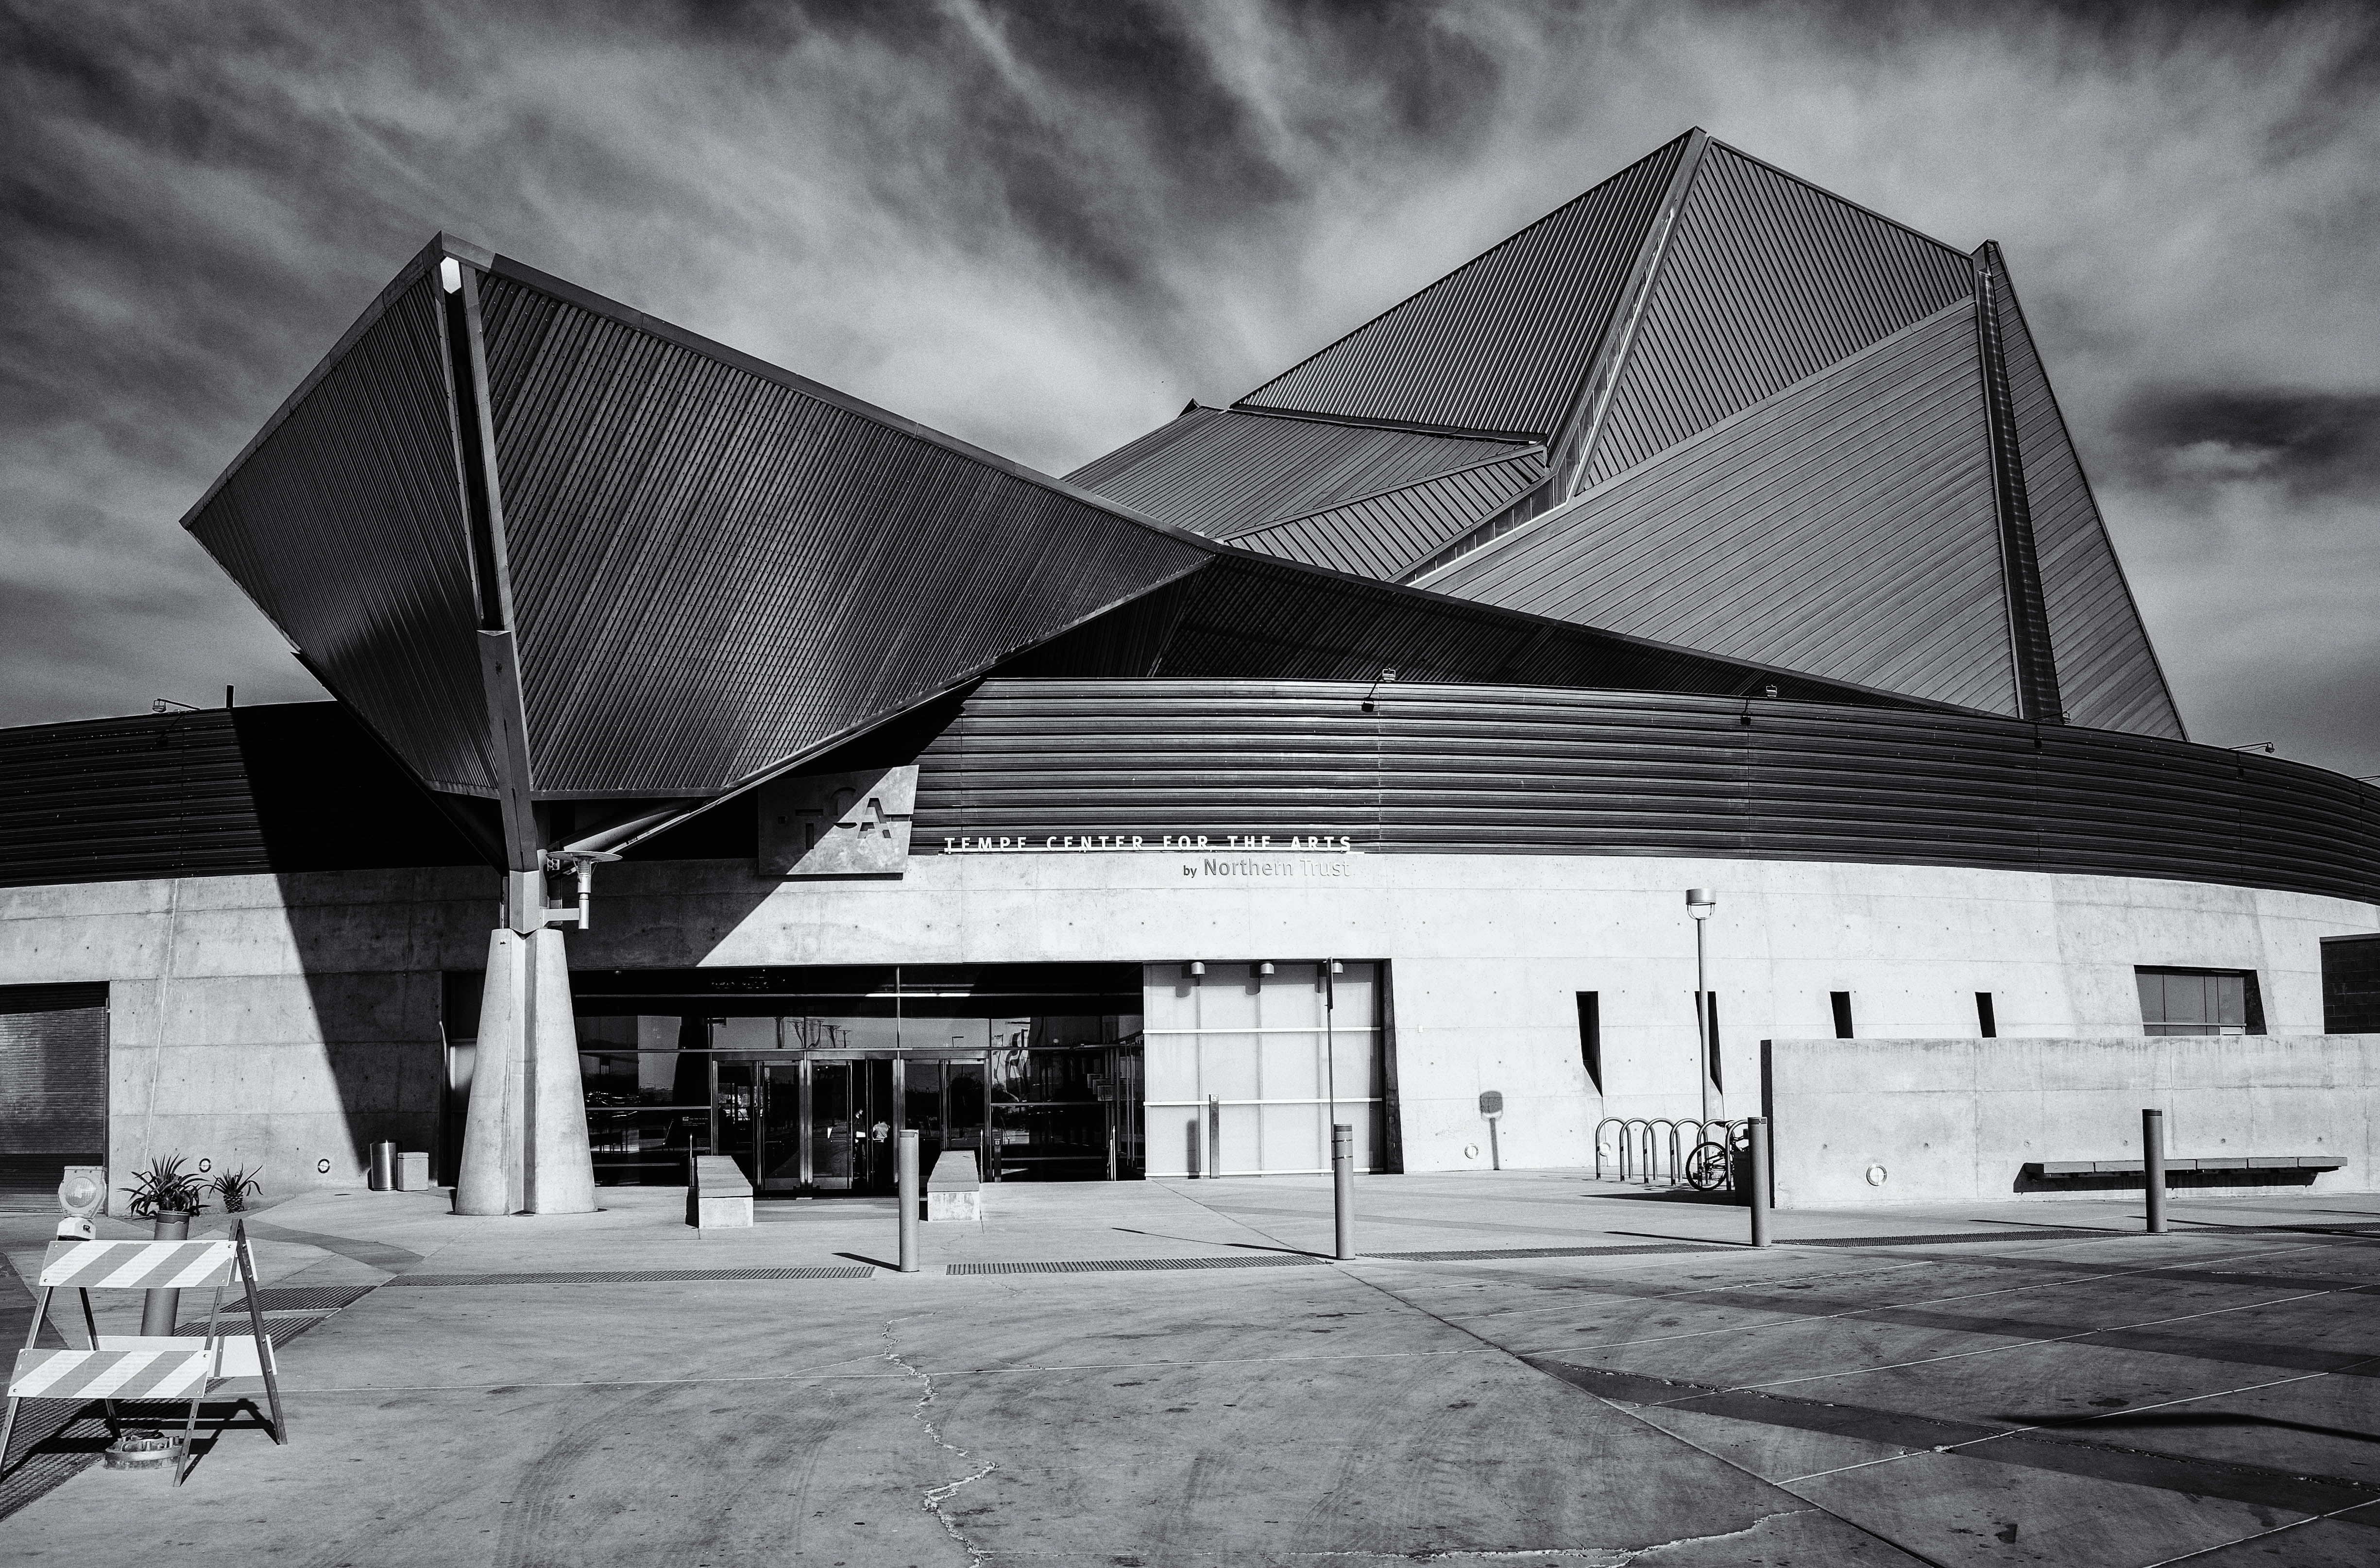 Tempe Center for the Arts - BW